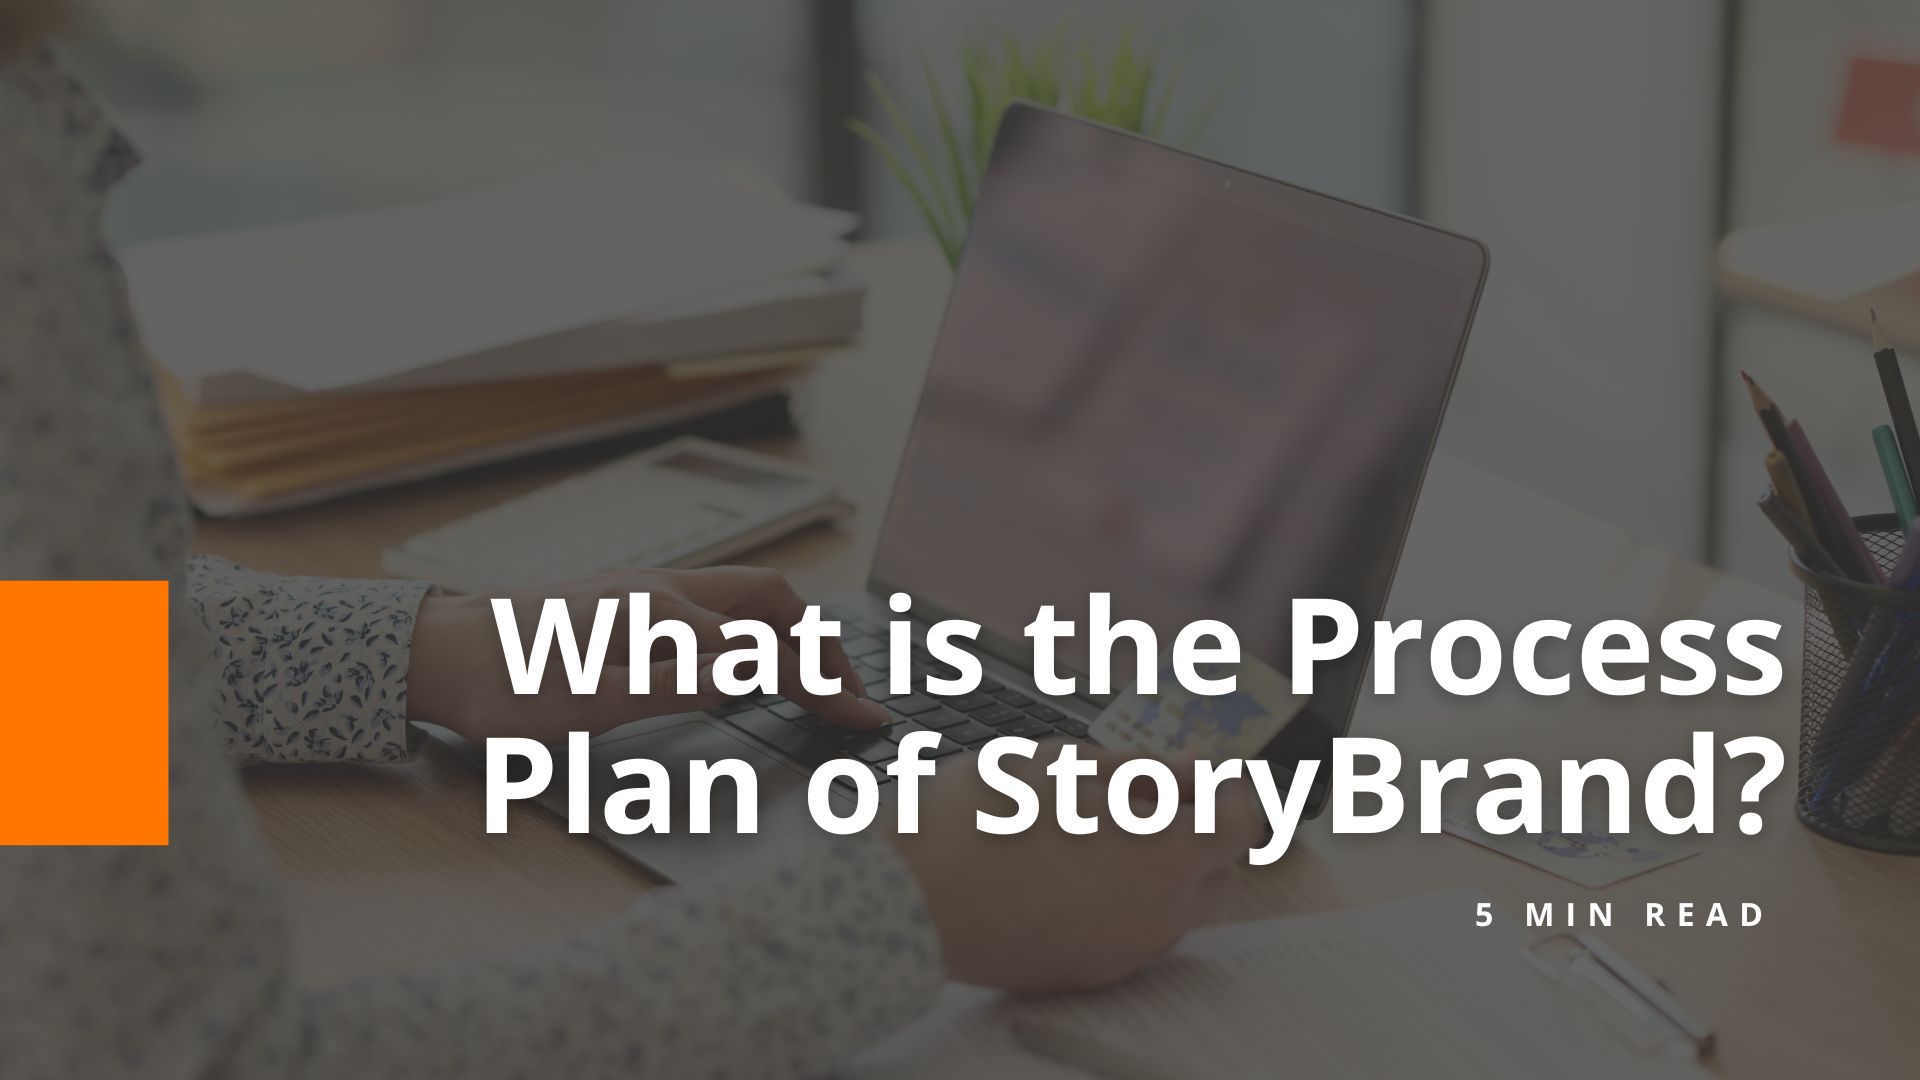 What's the Process Plan of StoryBrand